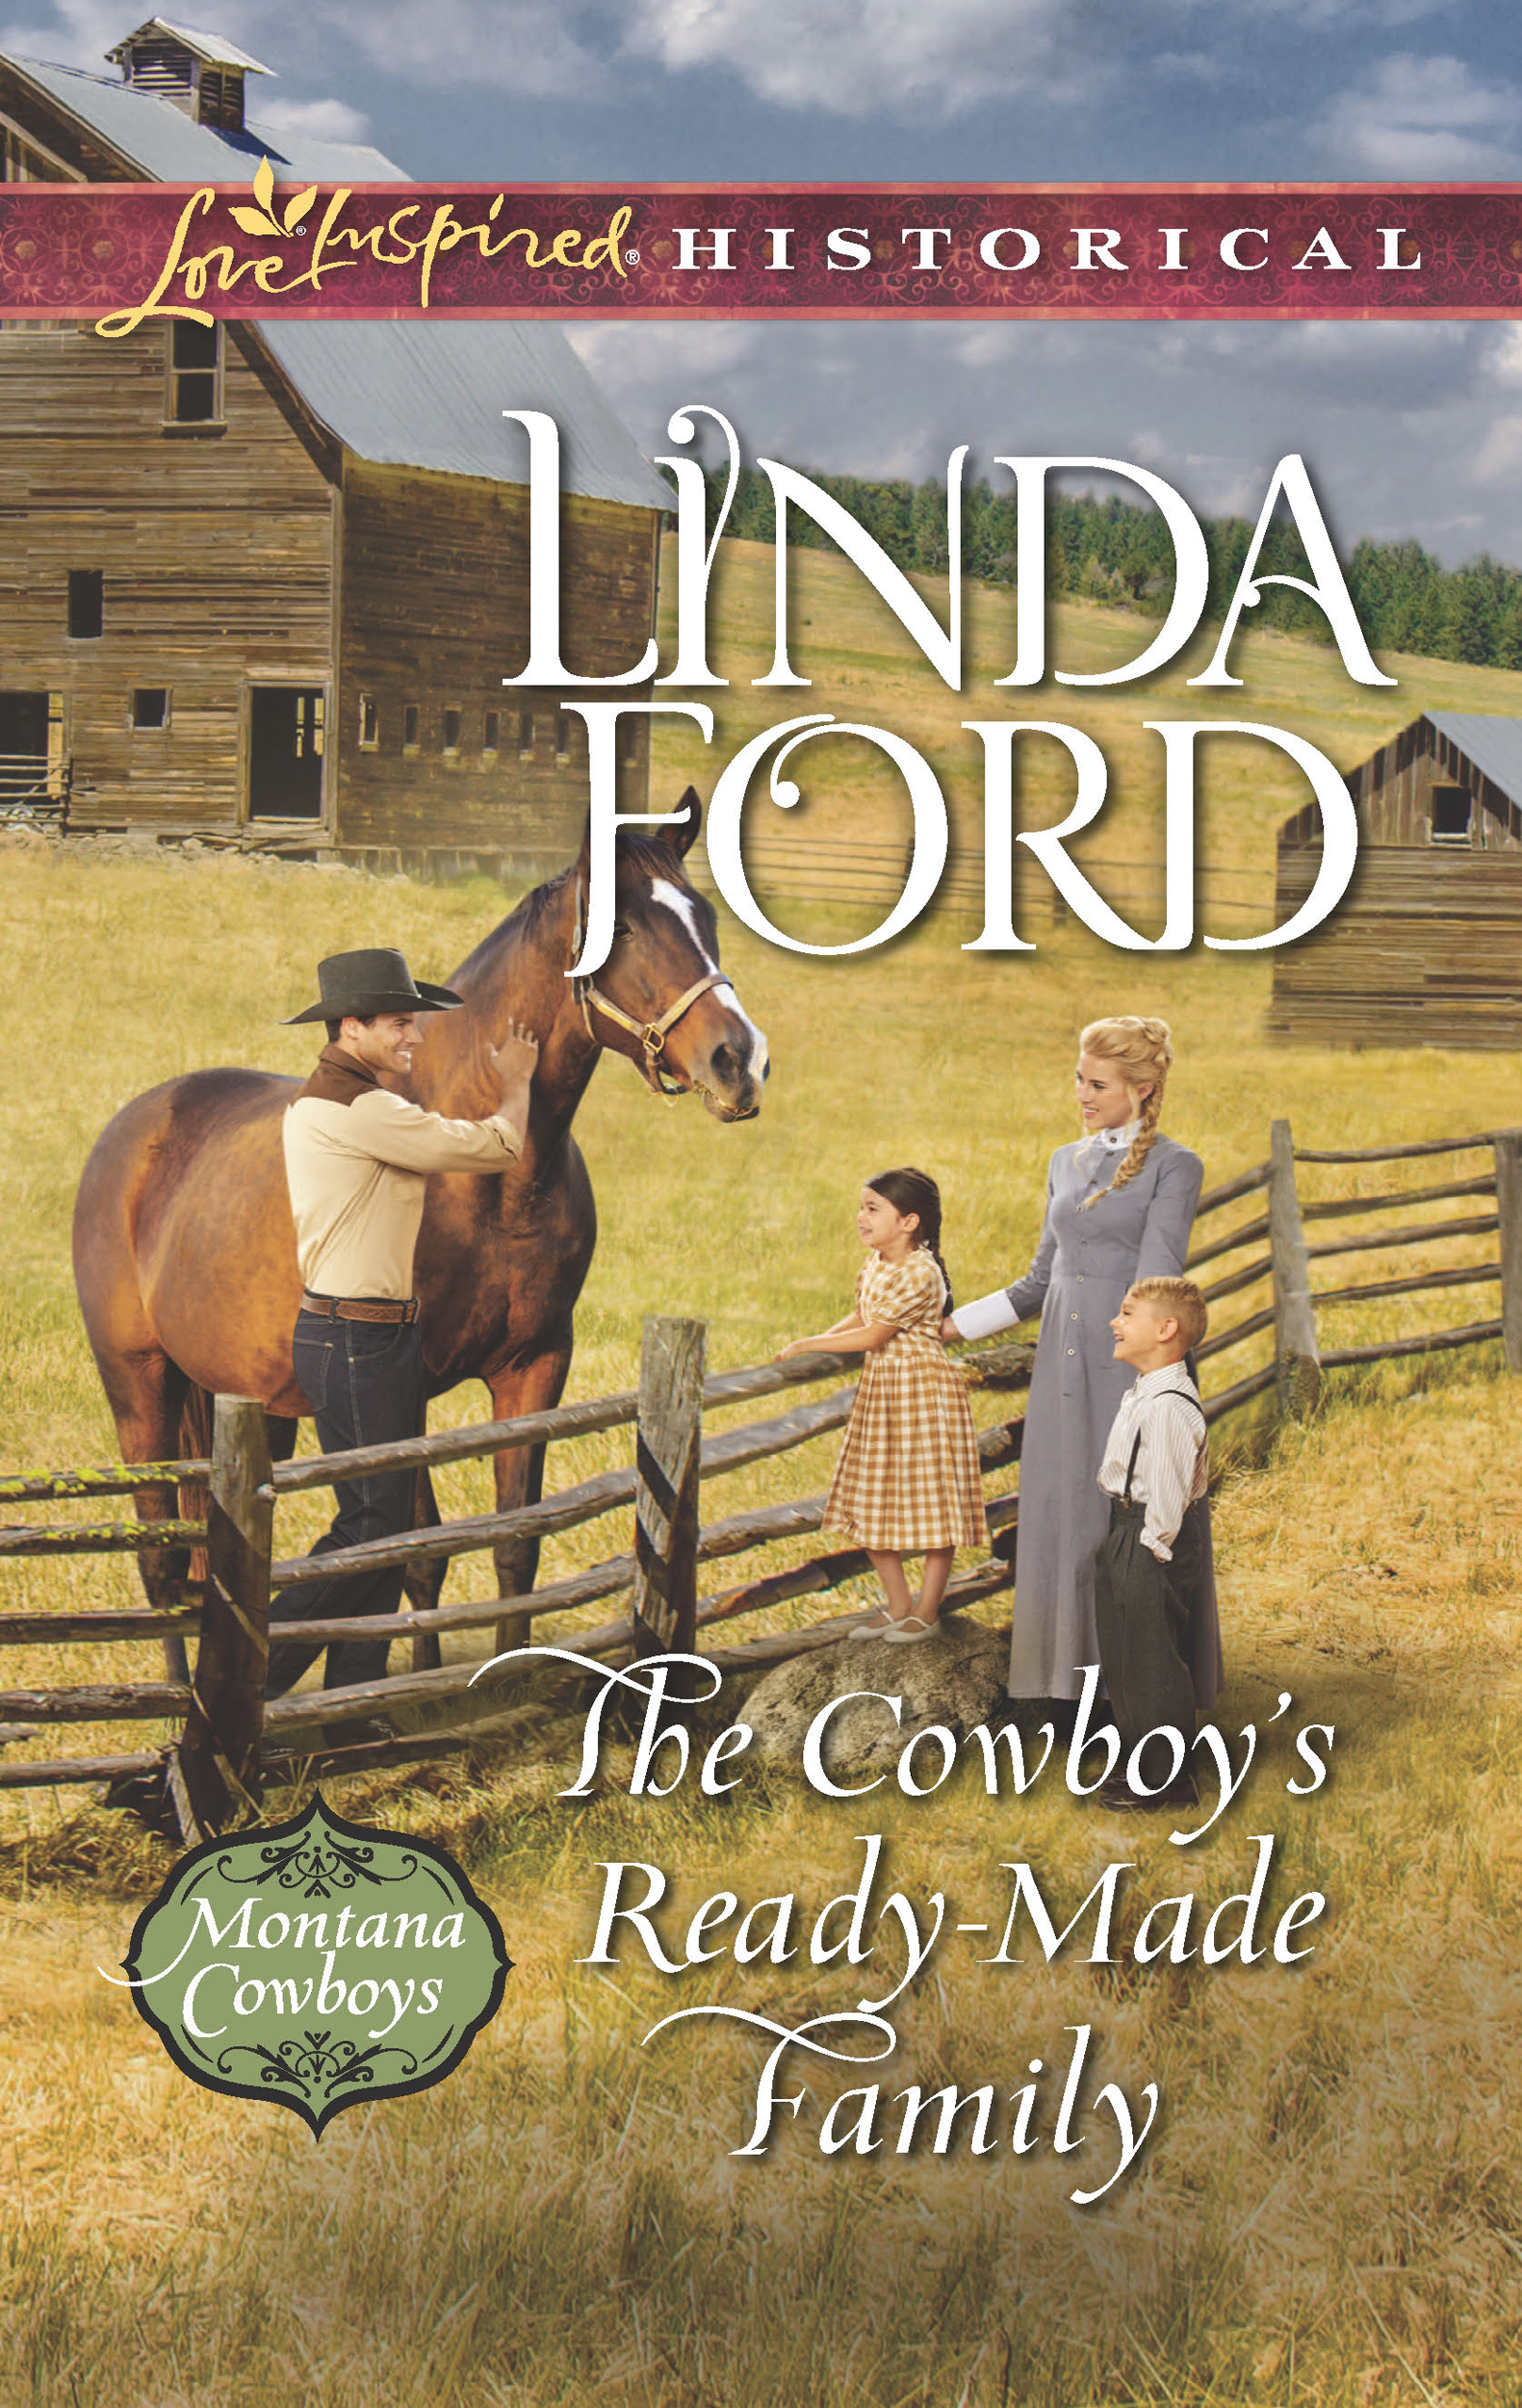 The Cowboy's Ready-Made Family (2015)